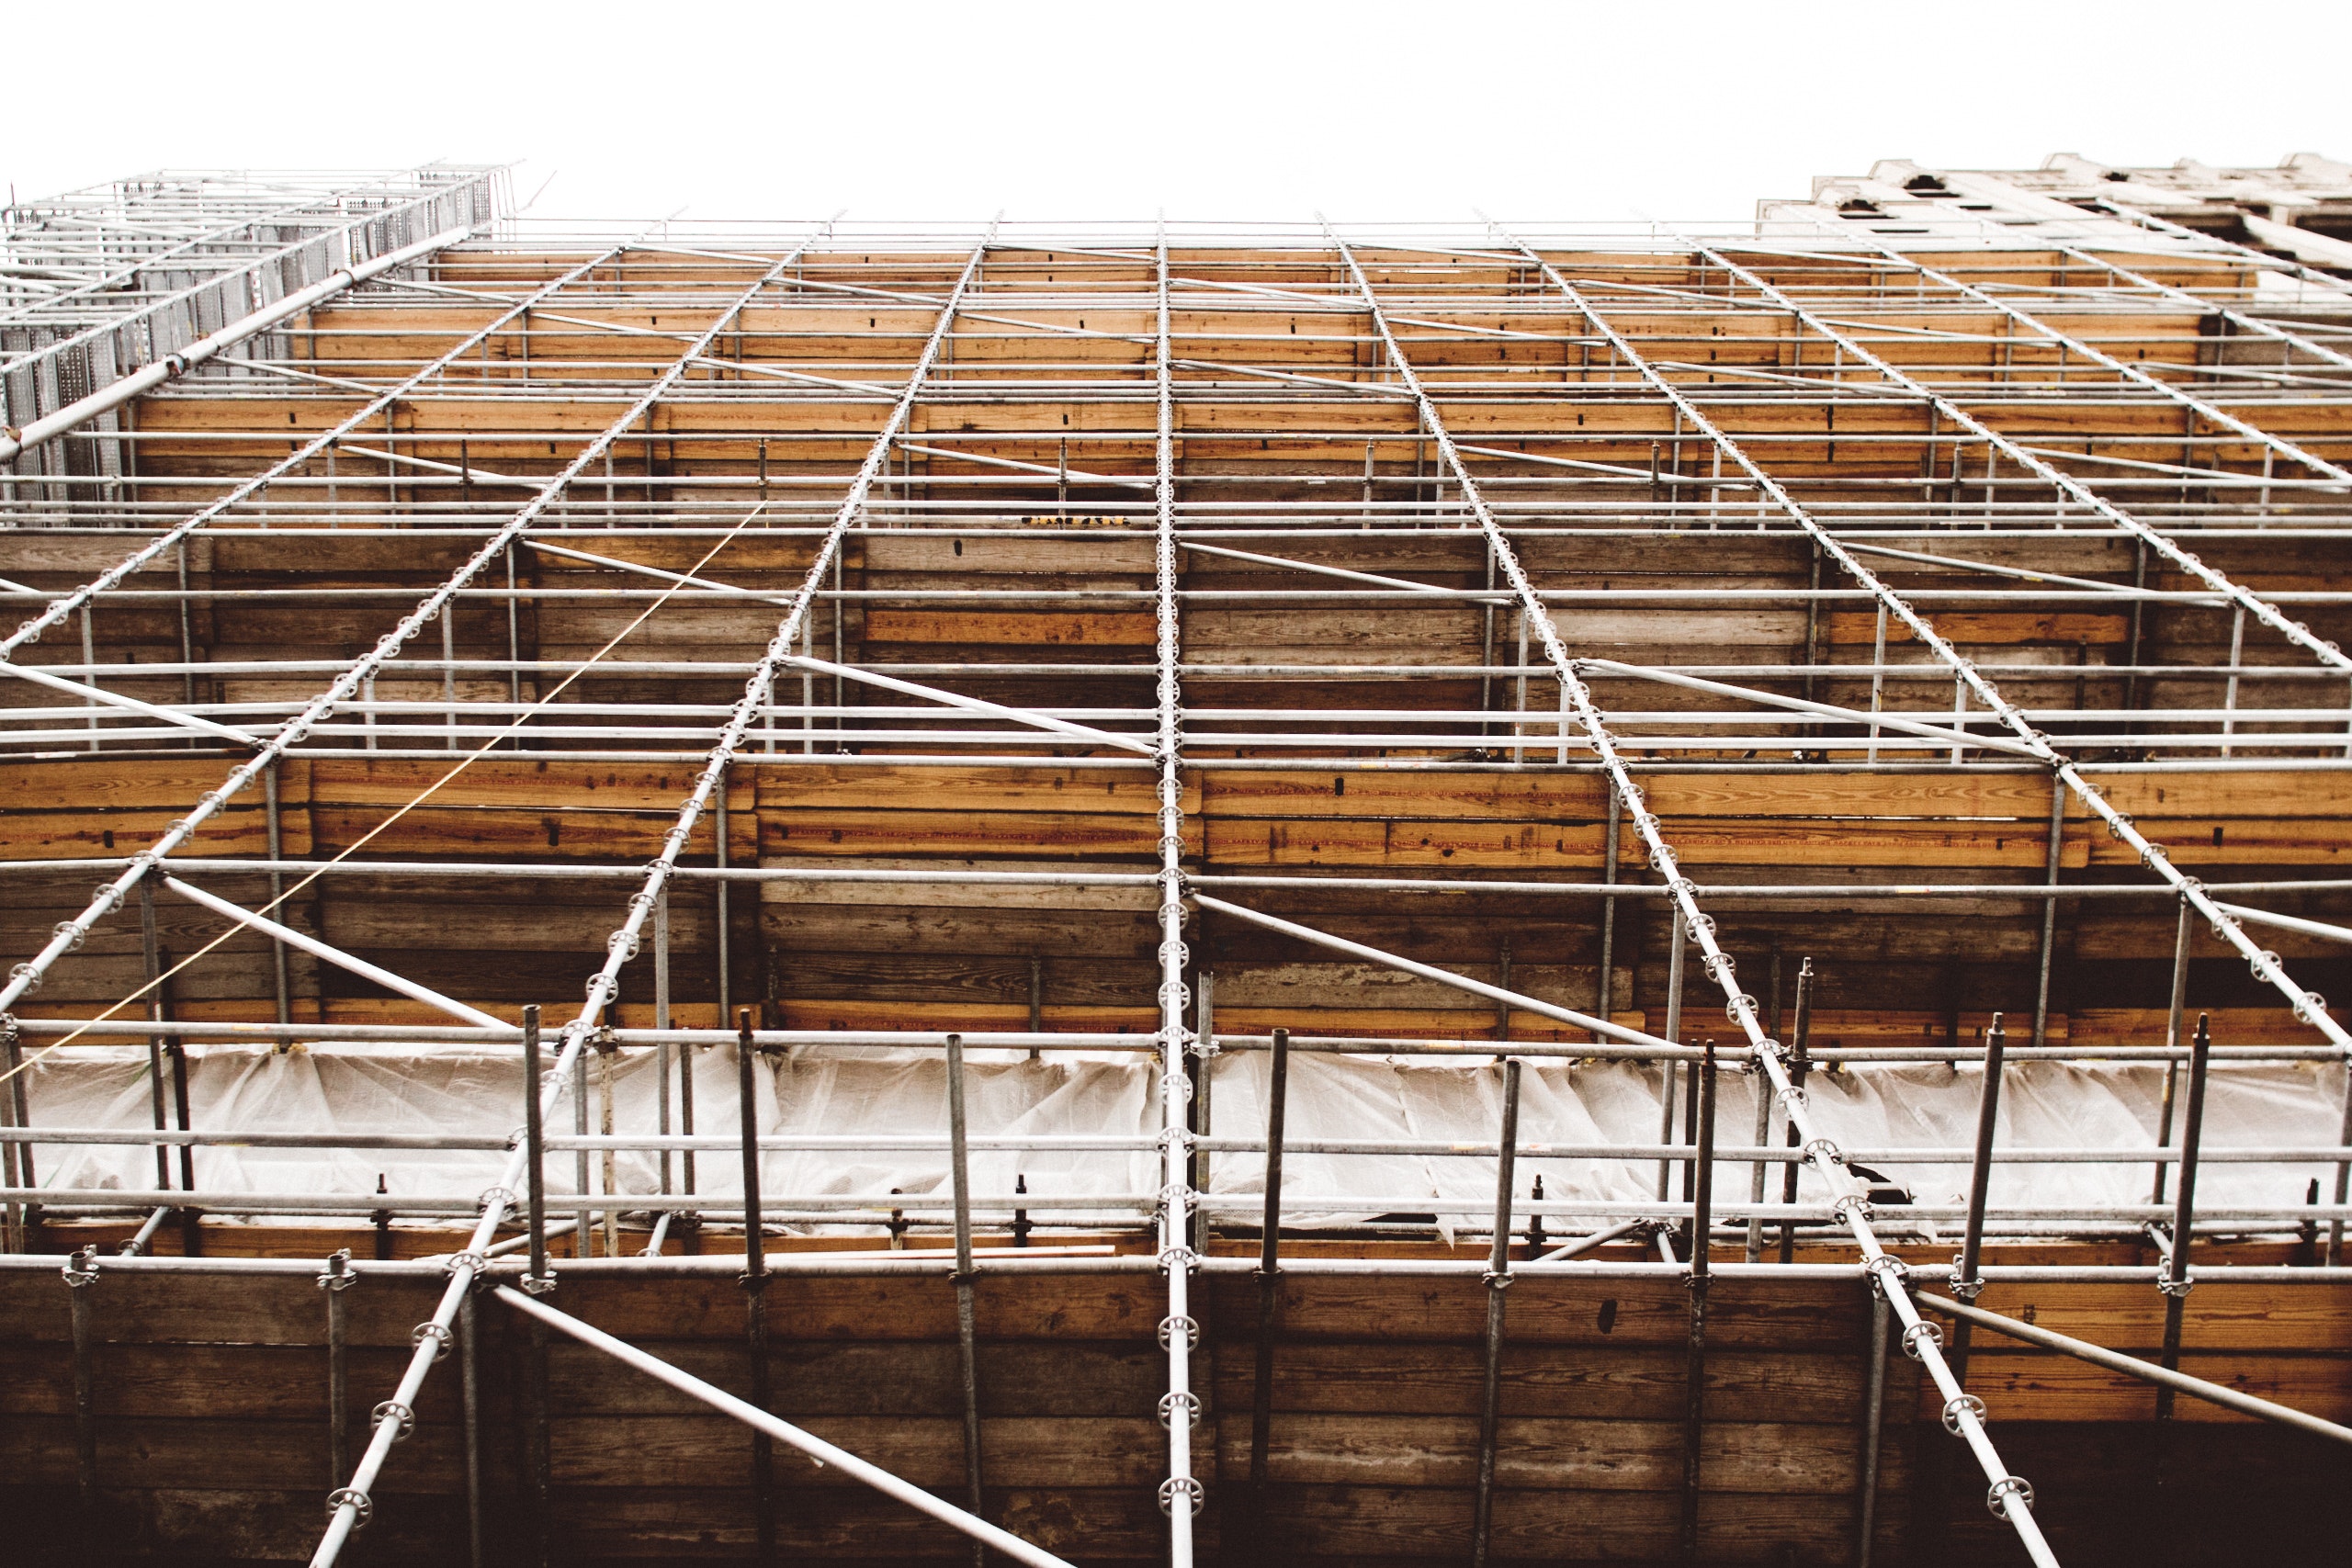 What are the advantages of the new buckle-type scaffolding compared to traditional scaffolding